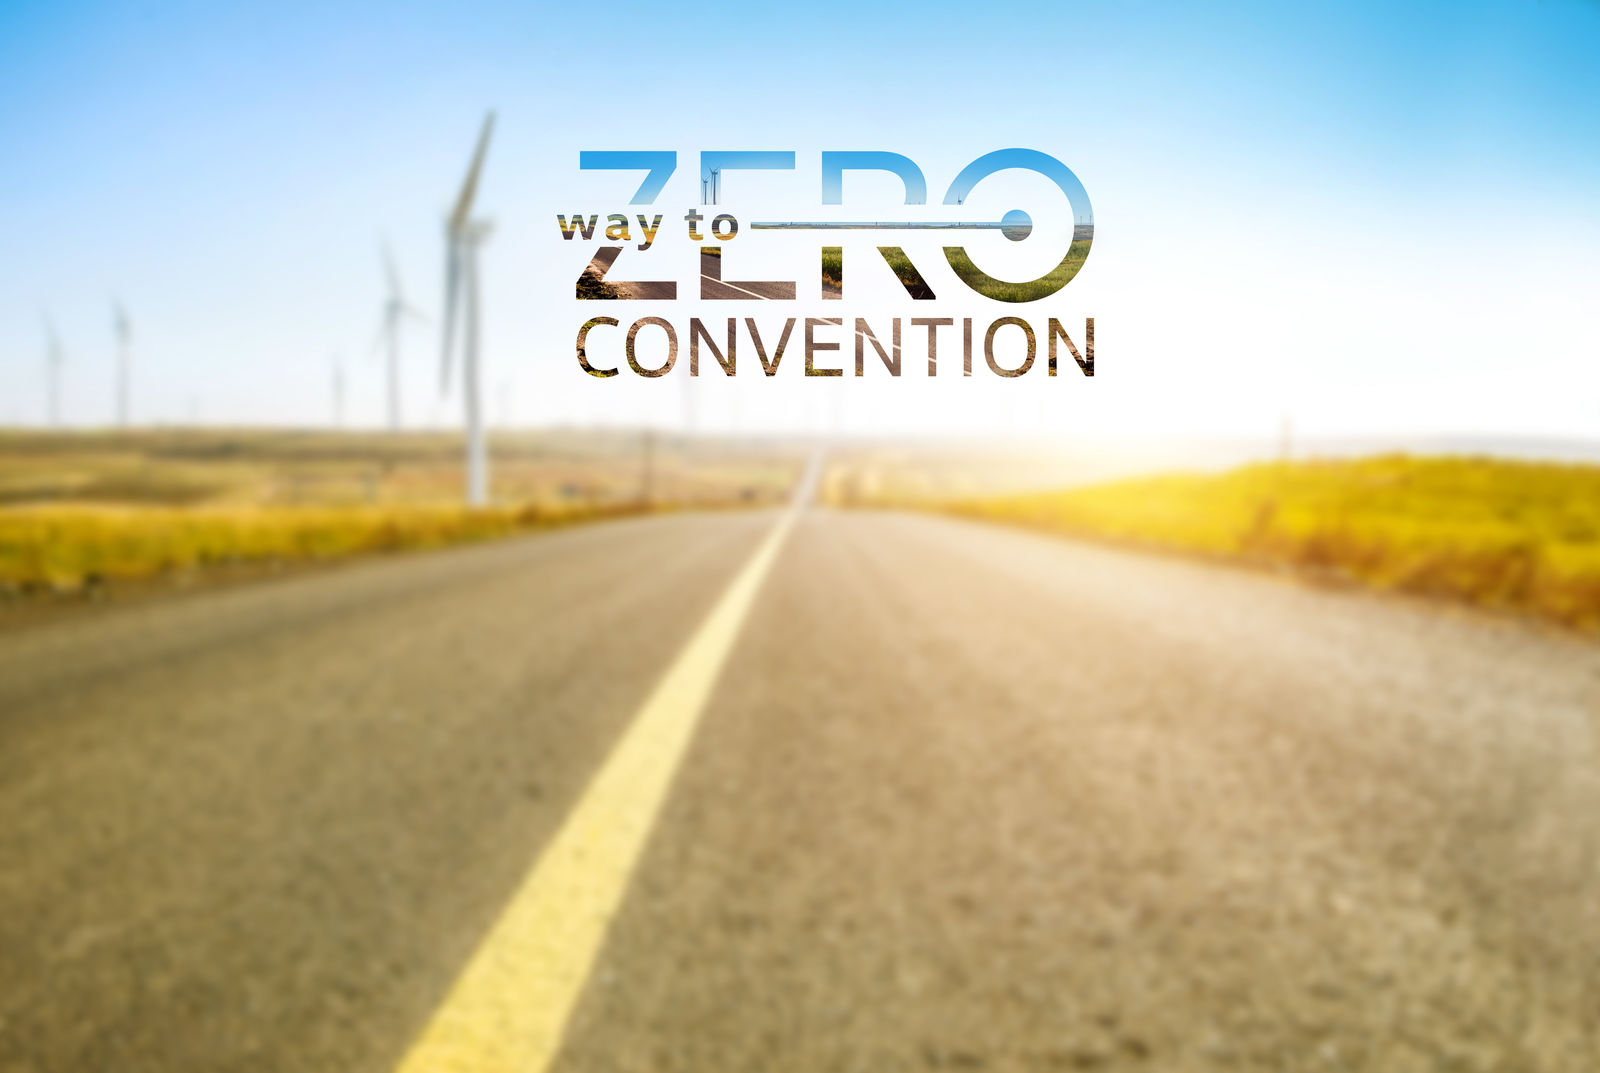 Mobility is going carbon-neutral - Volkswagen Way To Zero Convention on 29 April